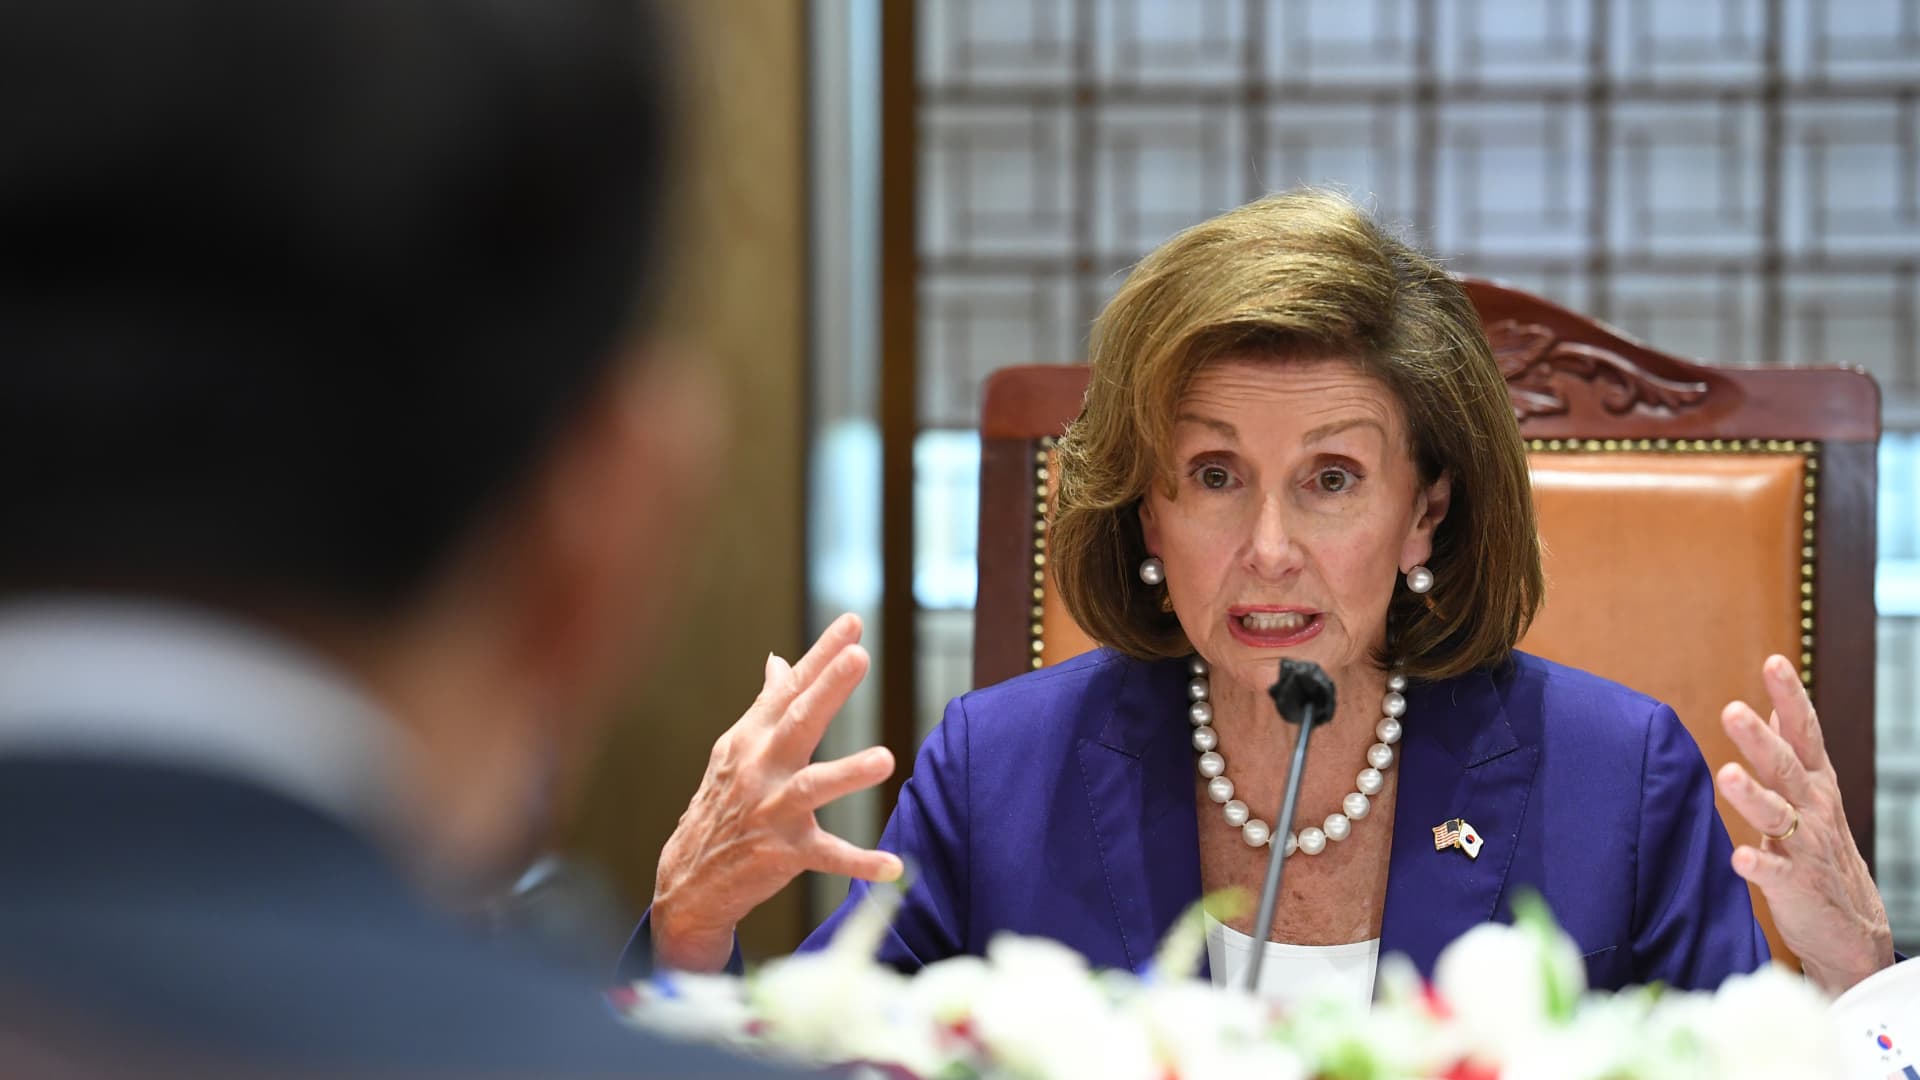 China sanctions Pelosi over trip to Taiwan, says visit was an ‘egregious provoca..